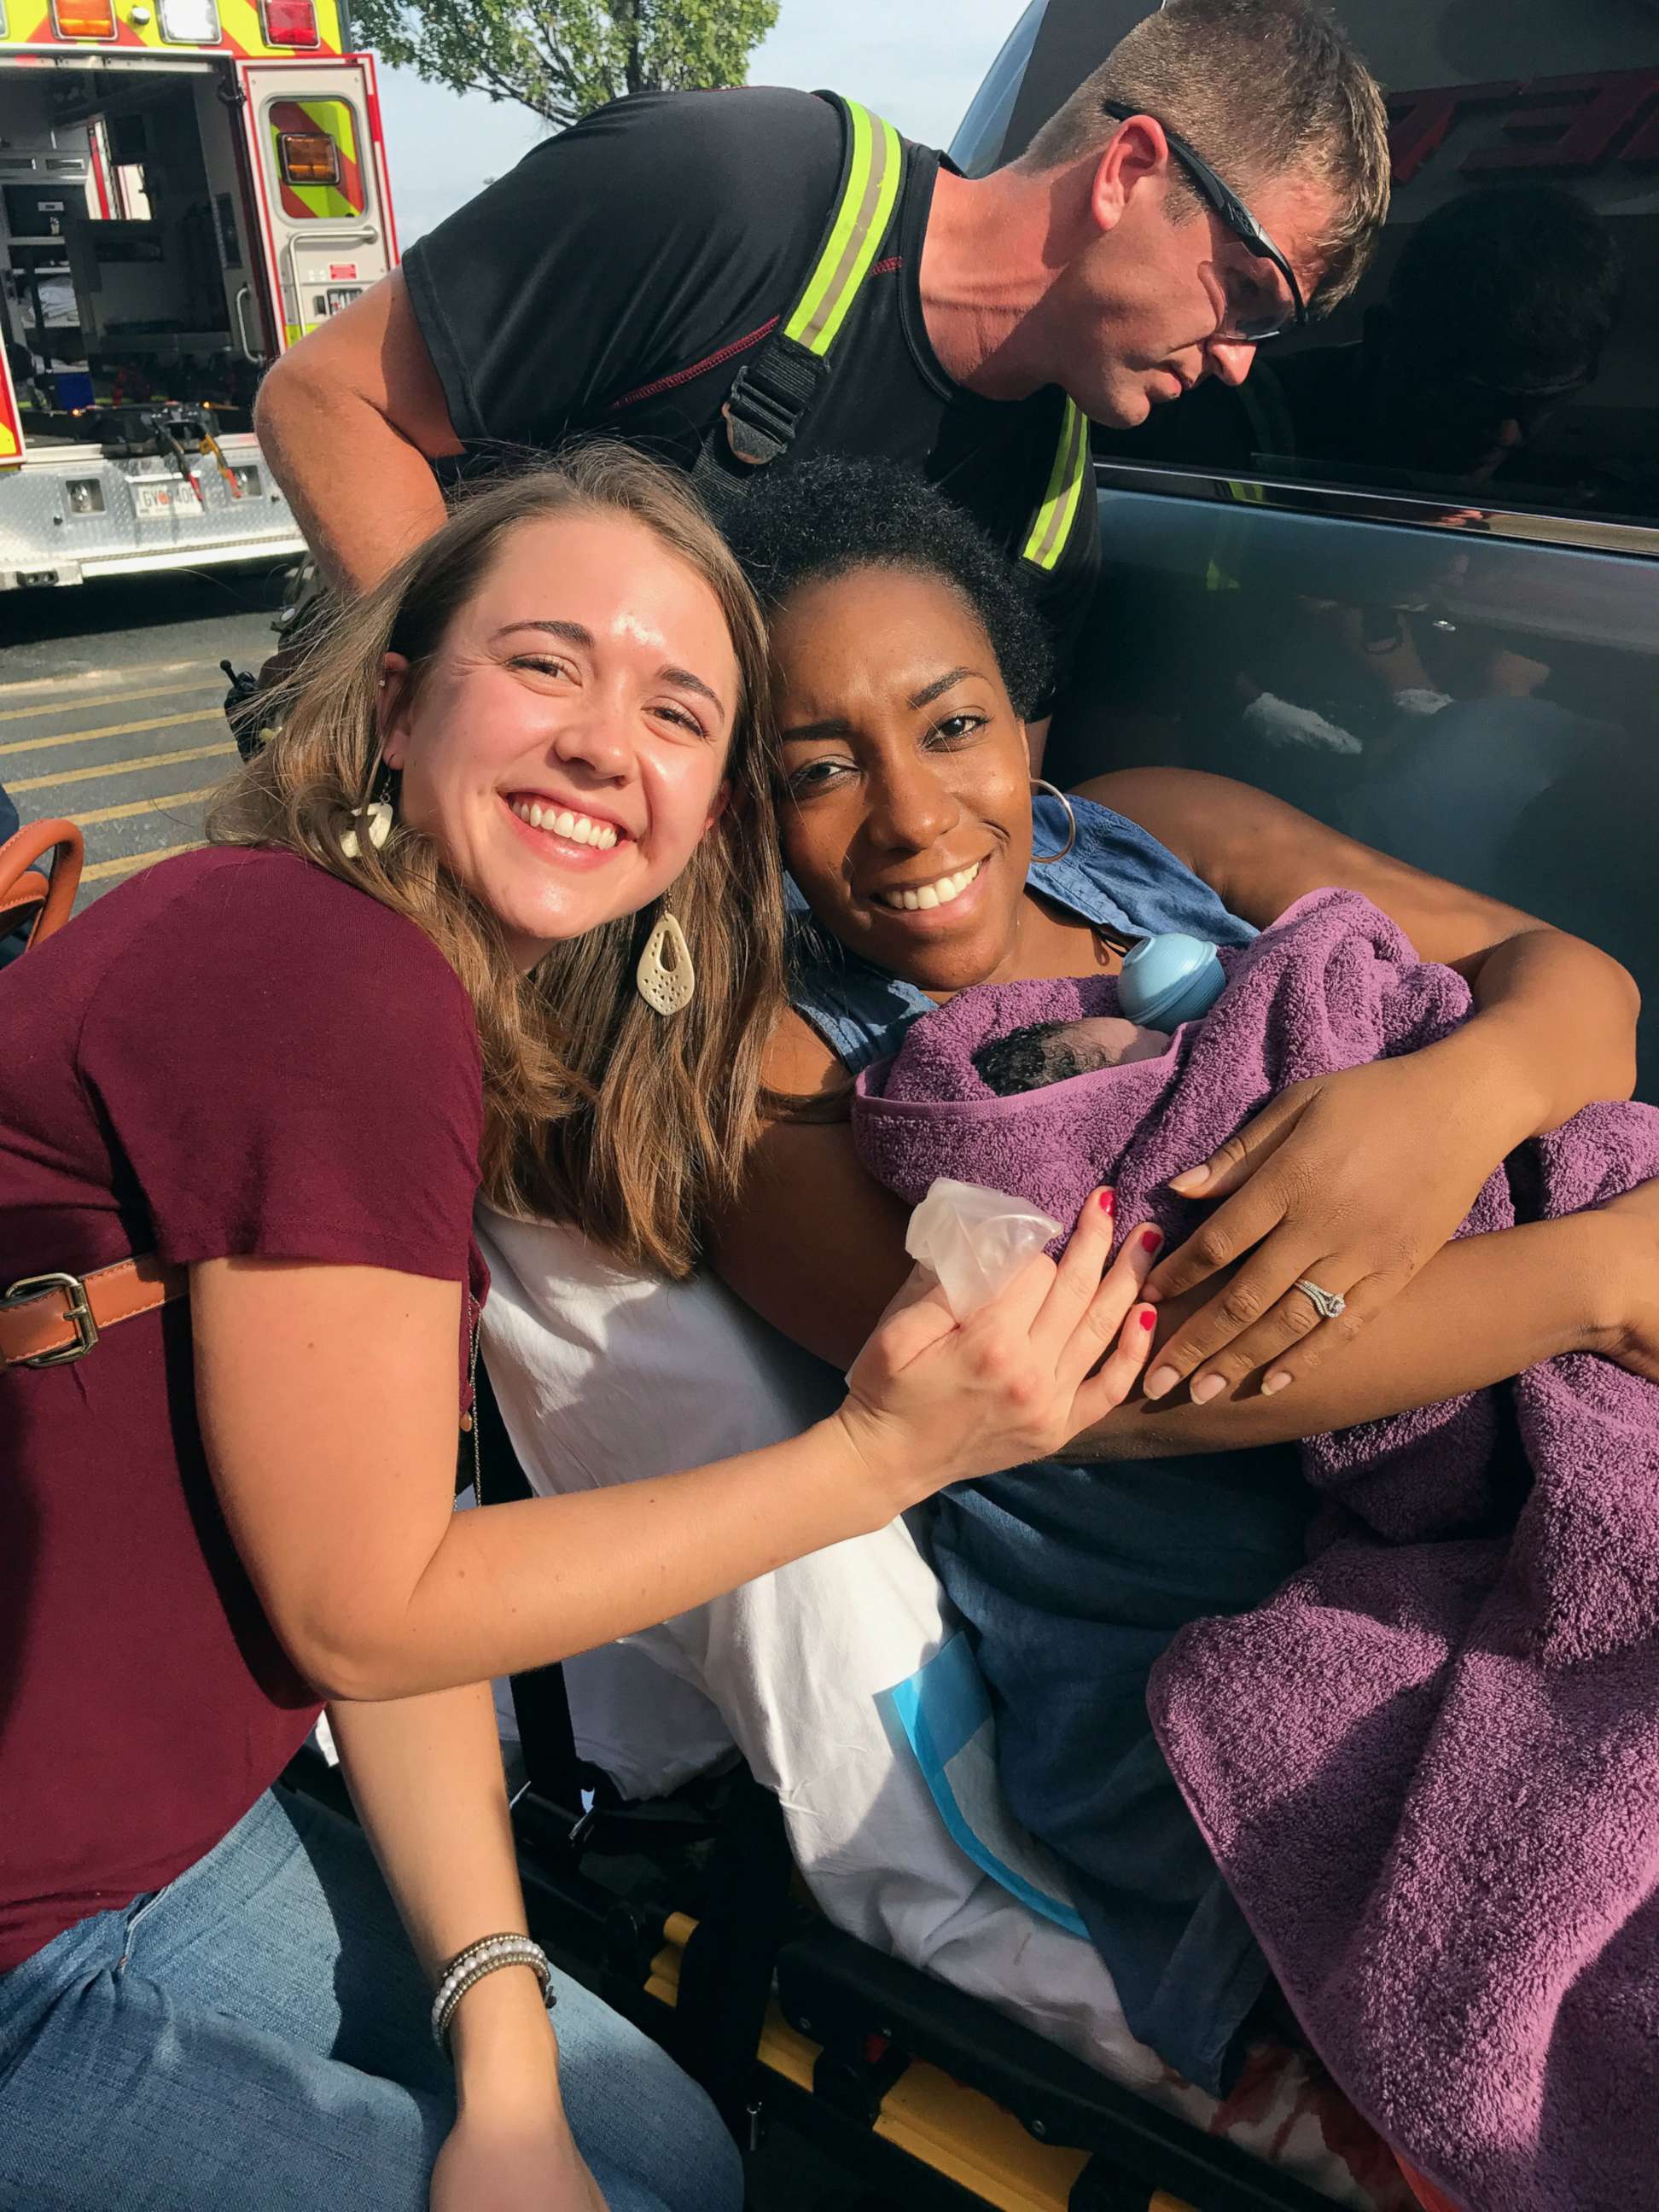 PHOTO: Caris Lockwood, 24, a labor nad delivery nurse from Atlanta, Georgia, delivered the baby boy of Tanya Saint Preux Picault on Aug. 25 outside the entrance of a Target store near the Mall of Georgia in Buford, Georgia. 